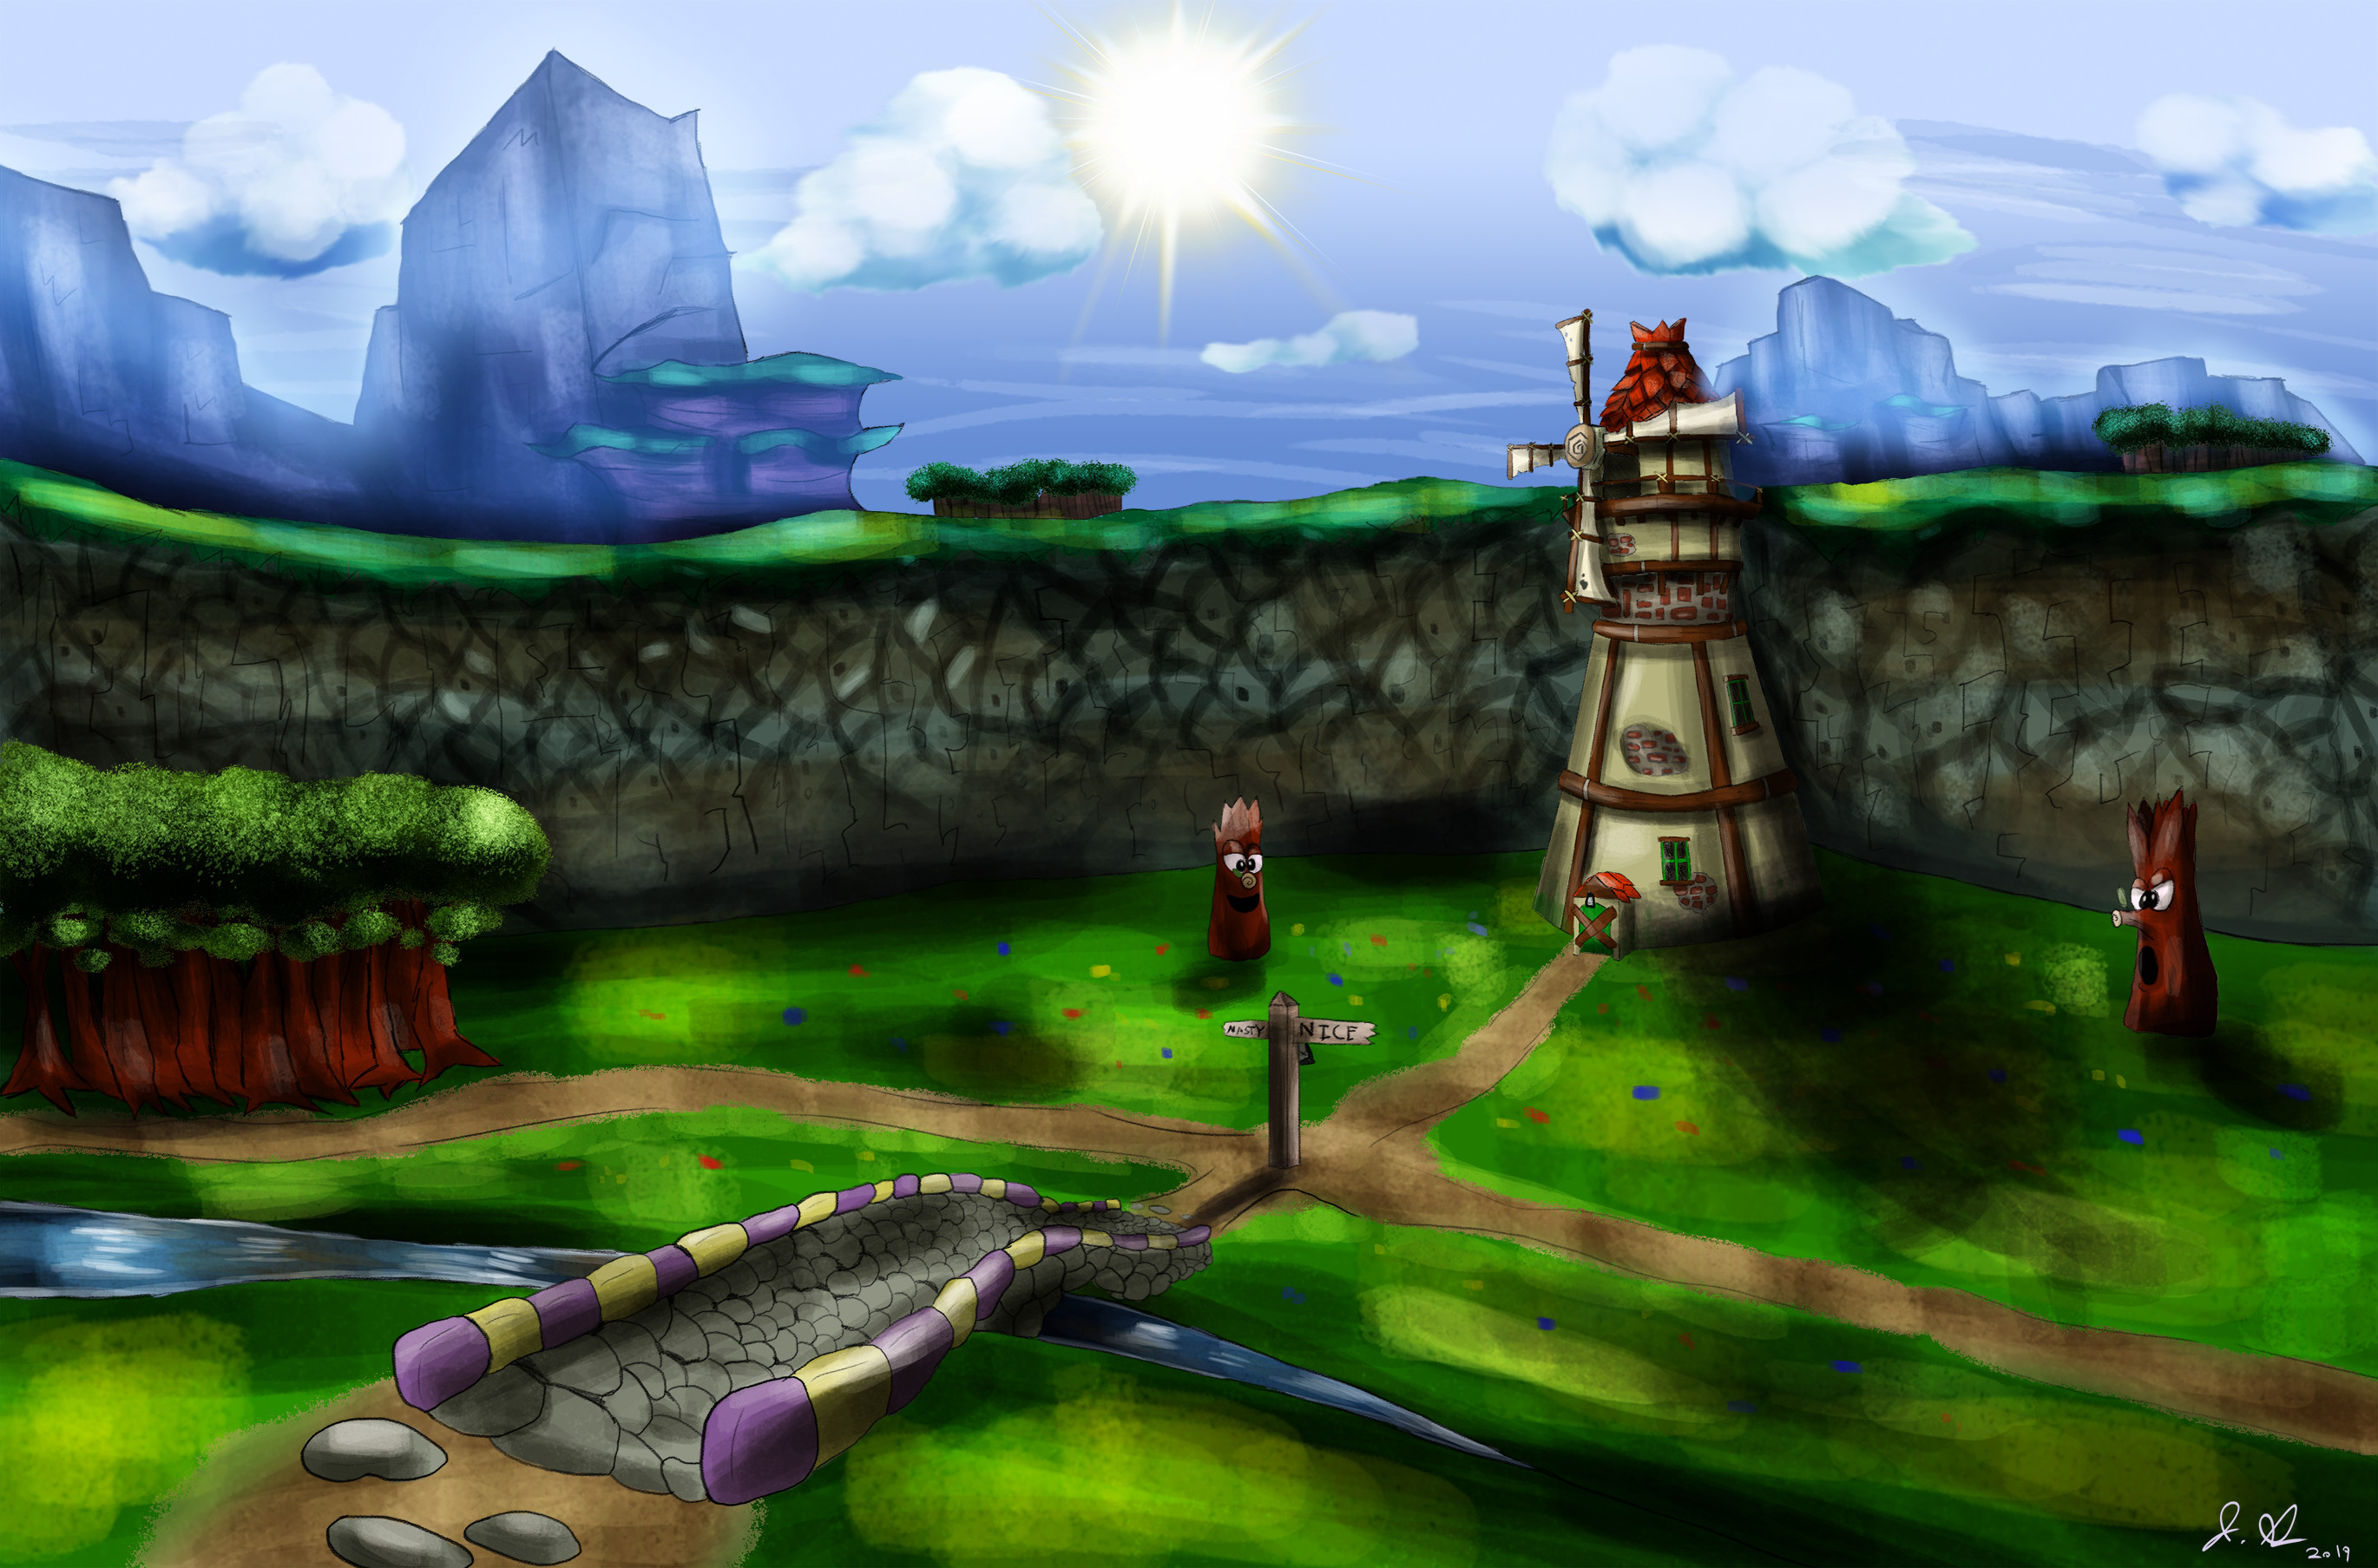 The windmill, the main area of the game